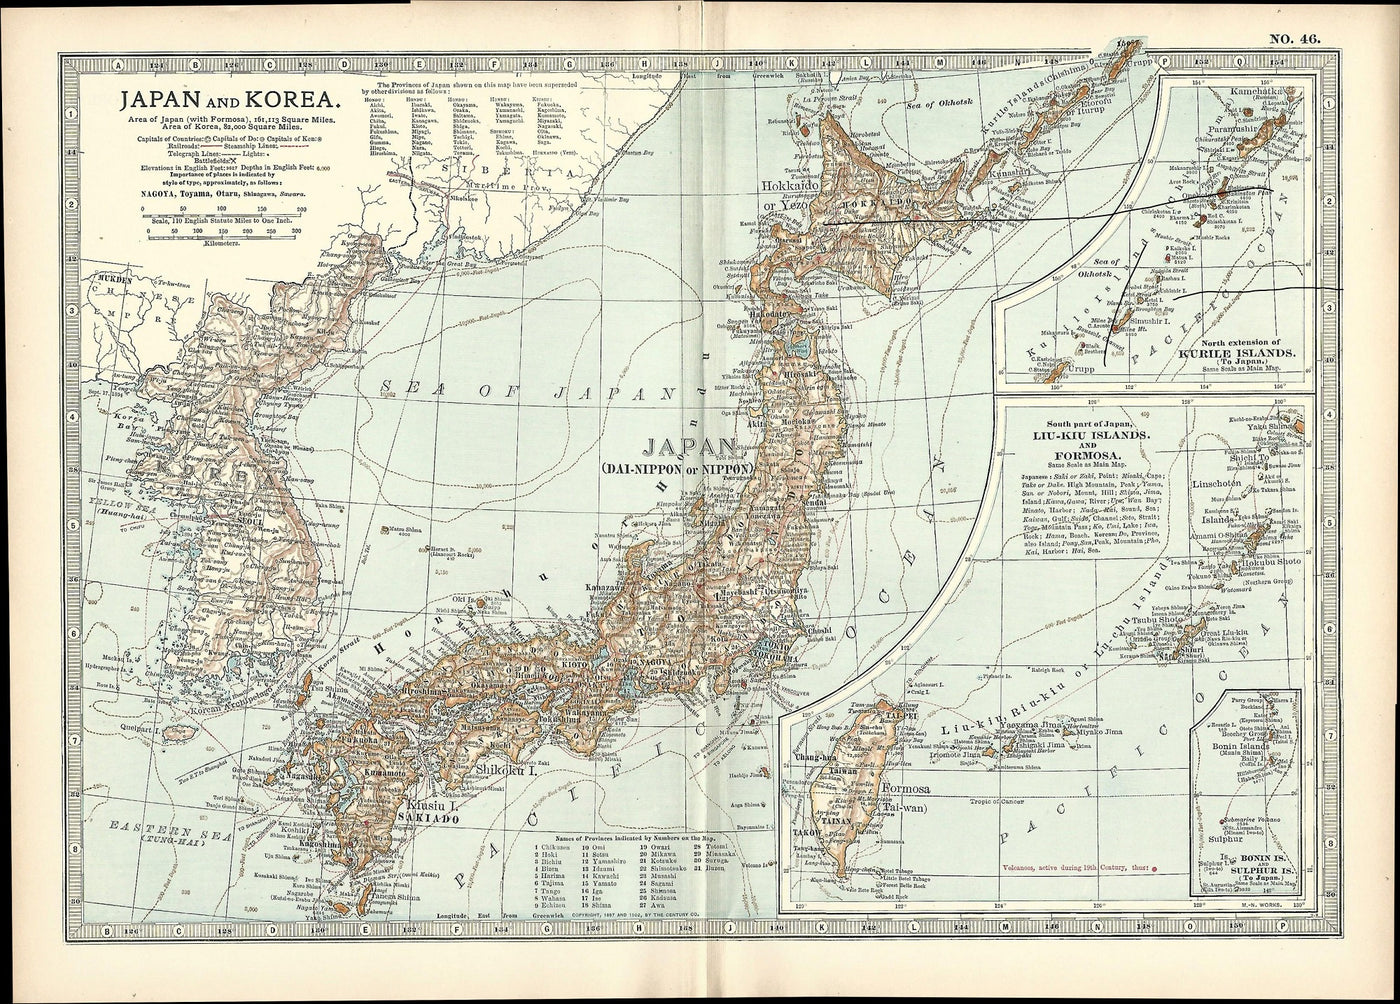 Japan and Korea antique map from Encyclopedia Britannica 1903